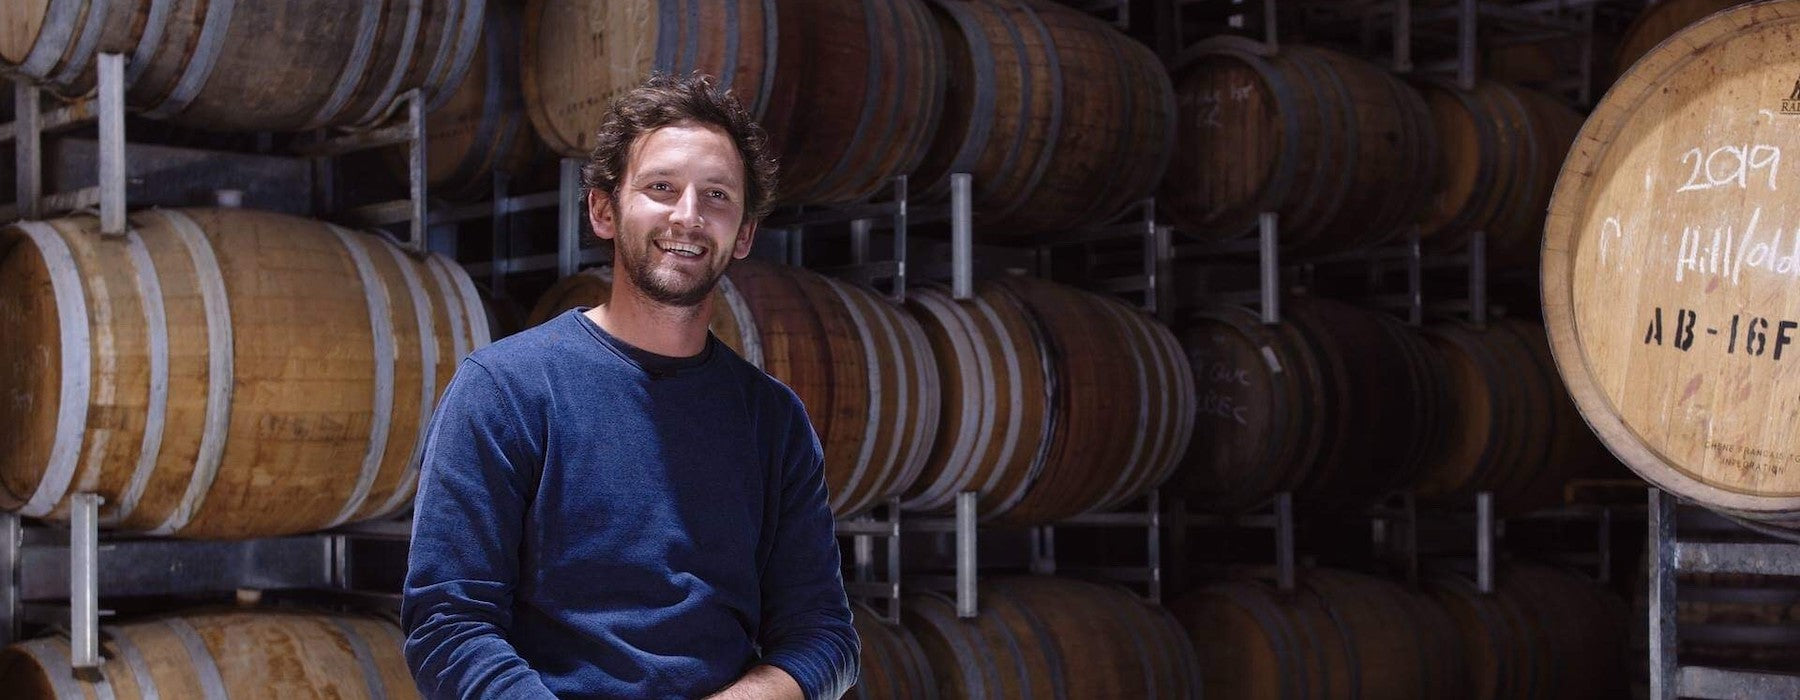 Winemaker Angus Wardlaw surrounded by wine barrels